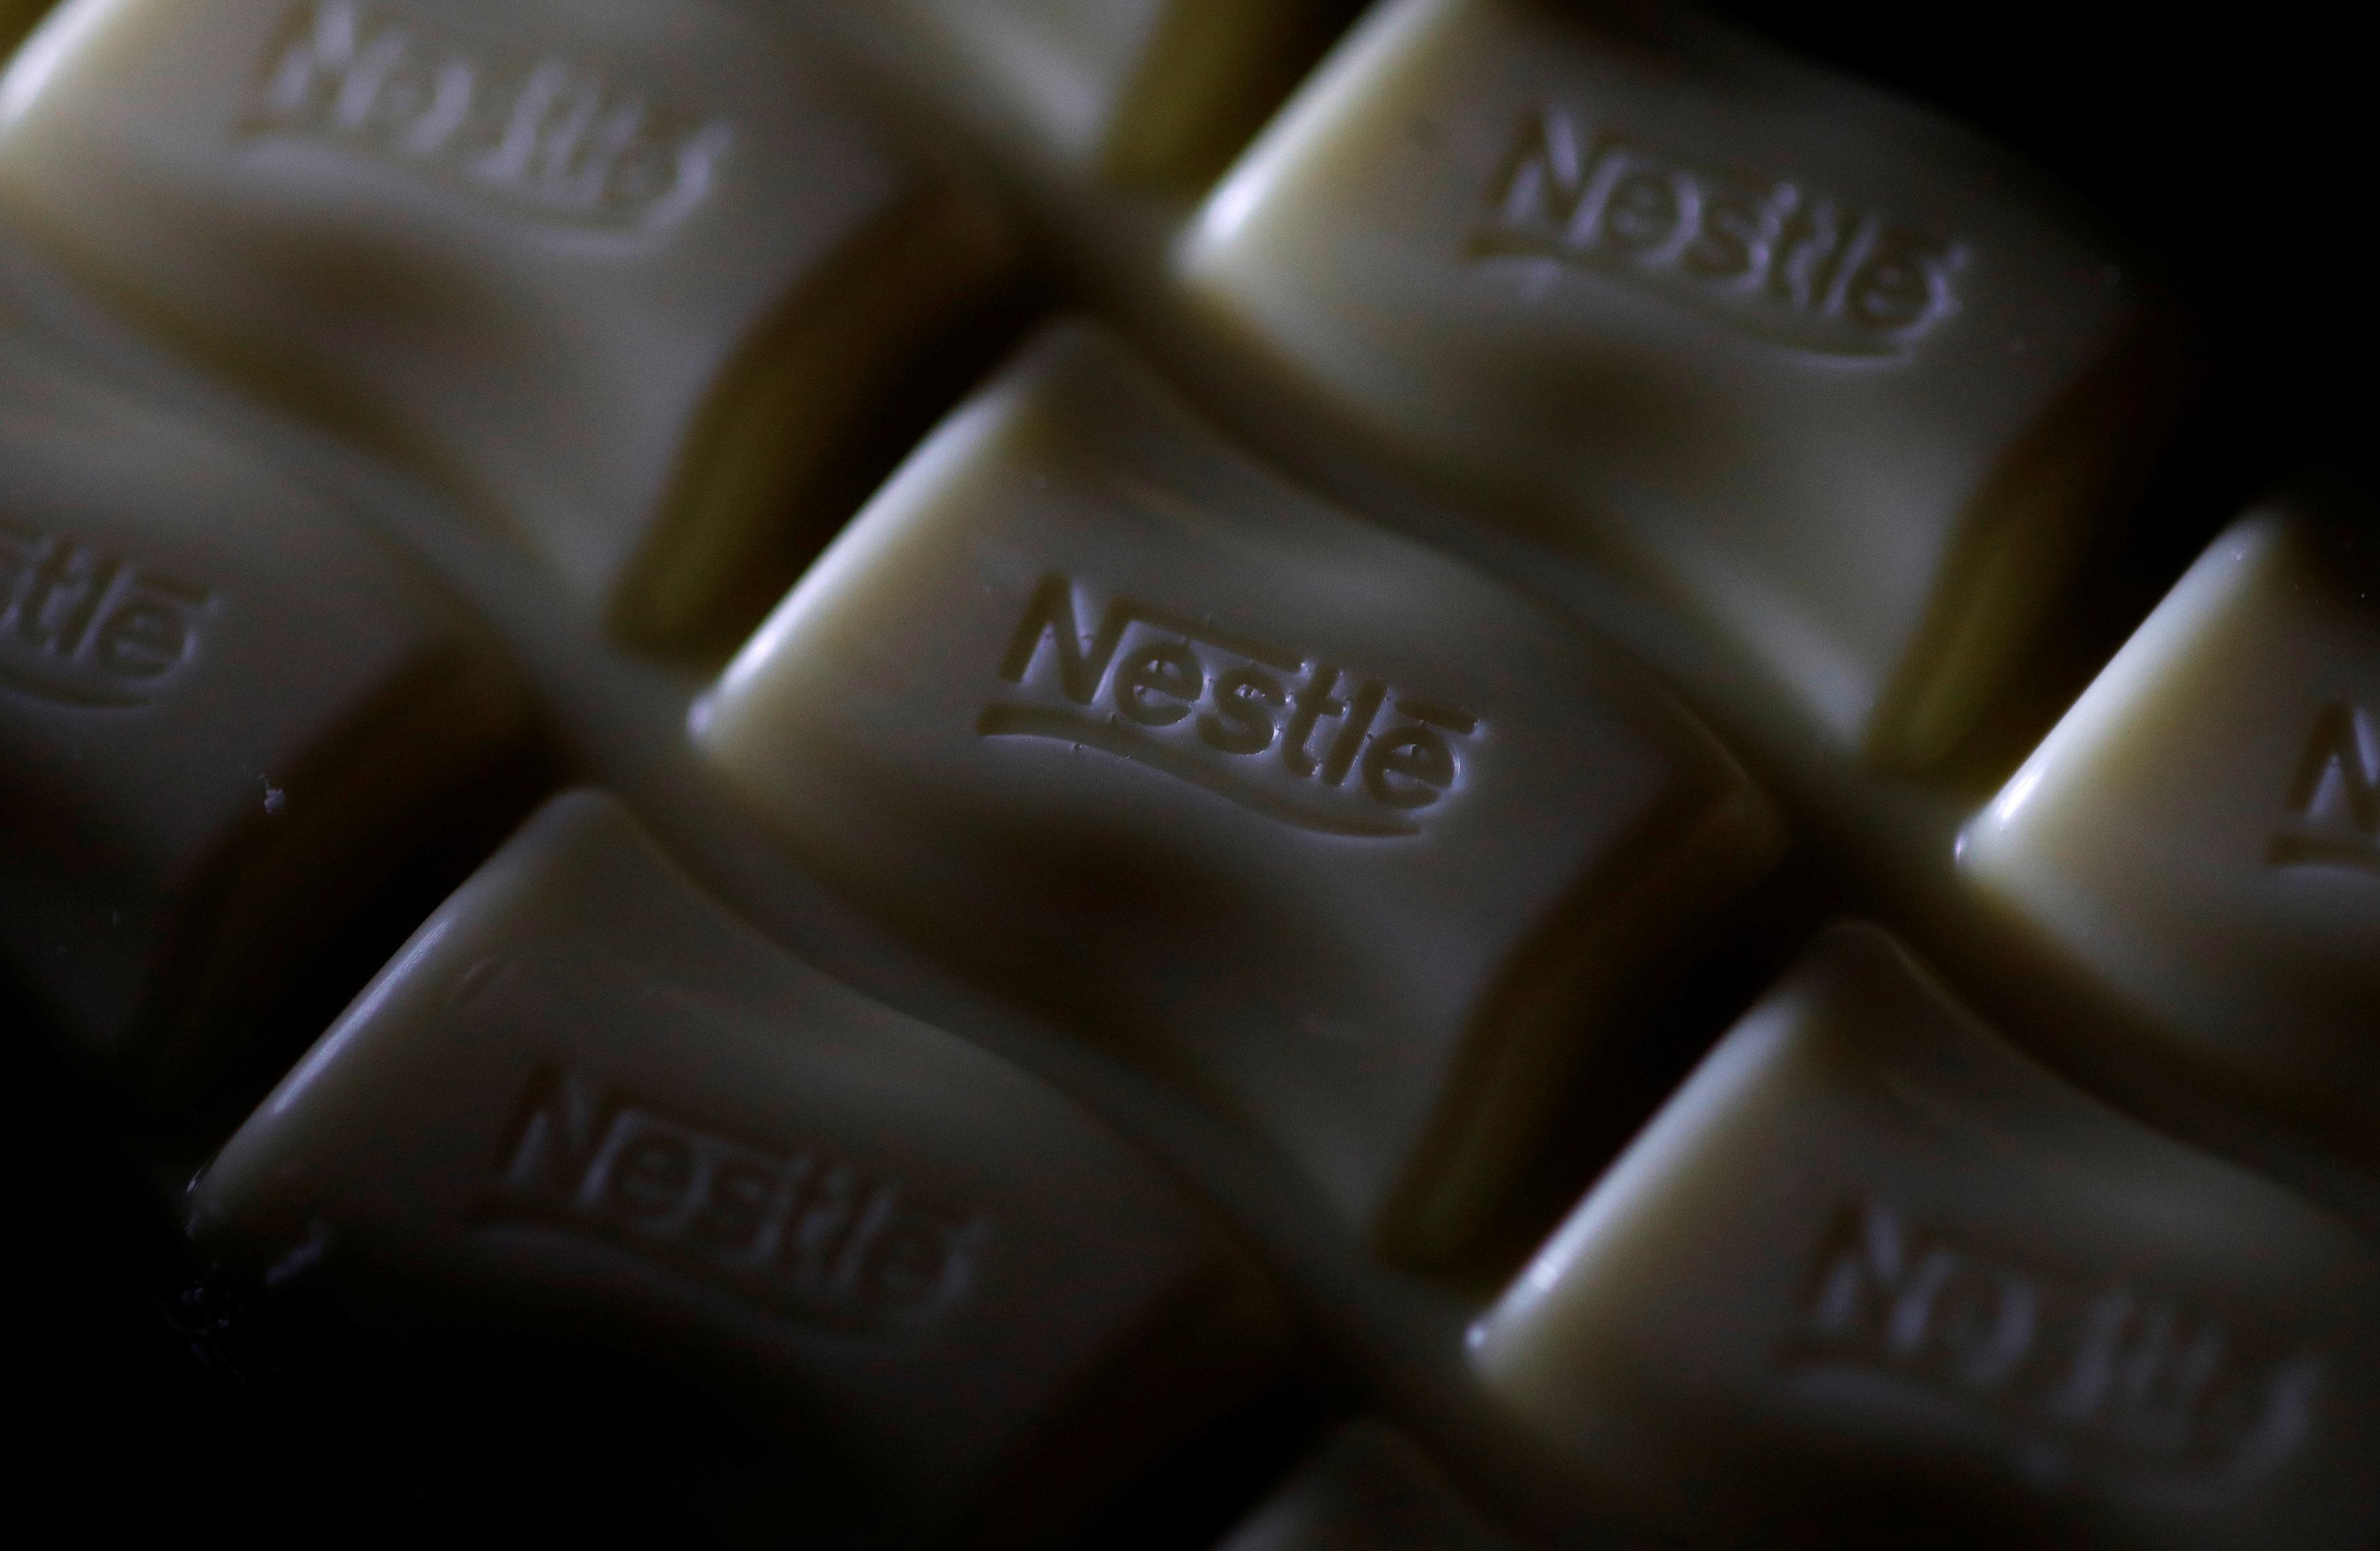 French minister 'shocked' by job cuts at Nestle's Galderma unit